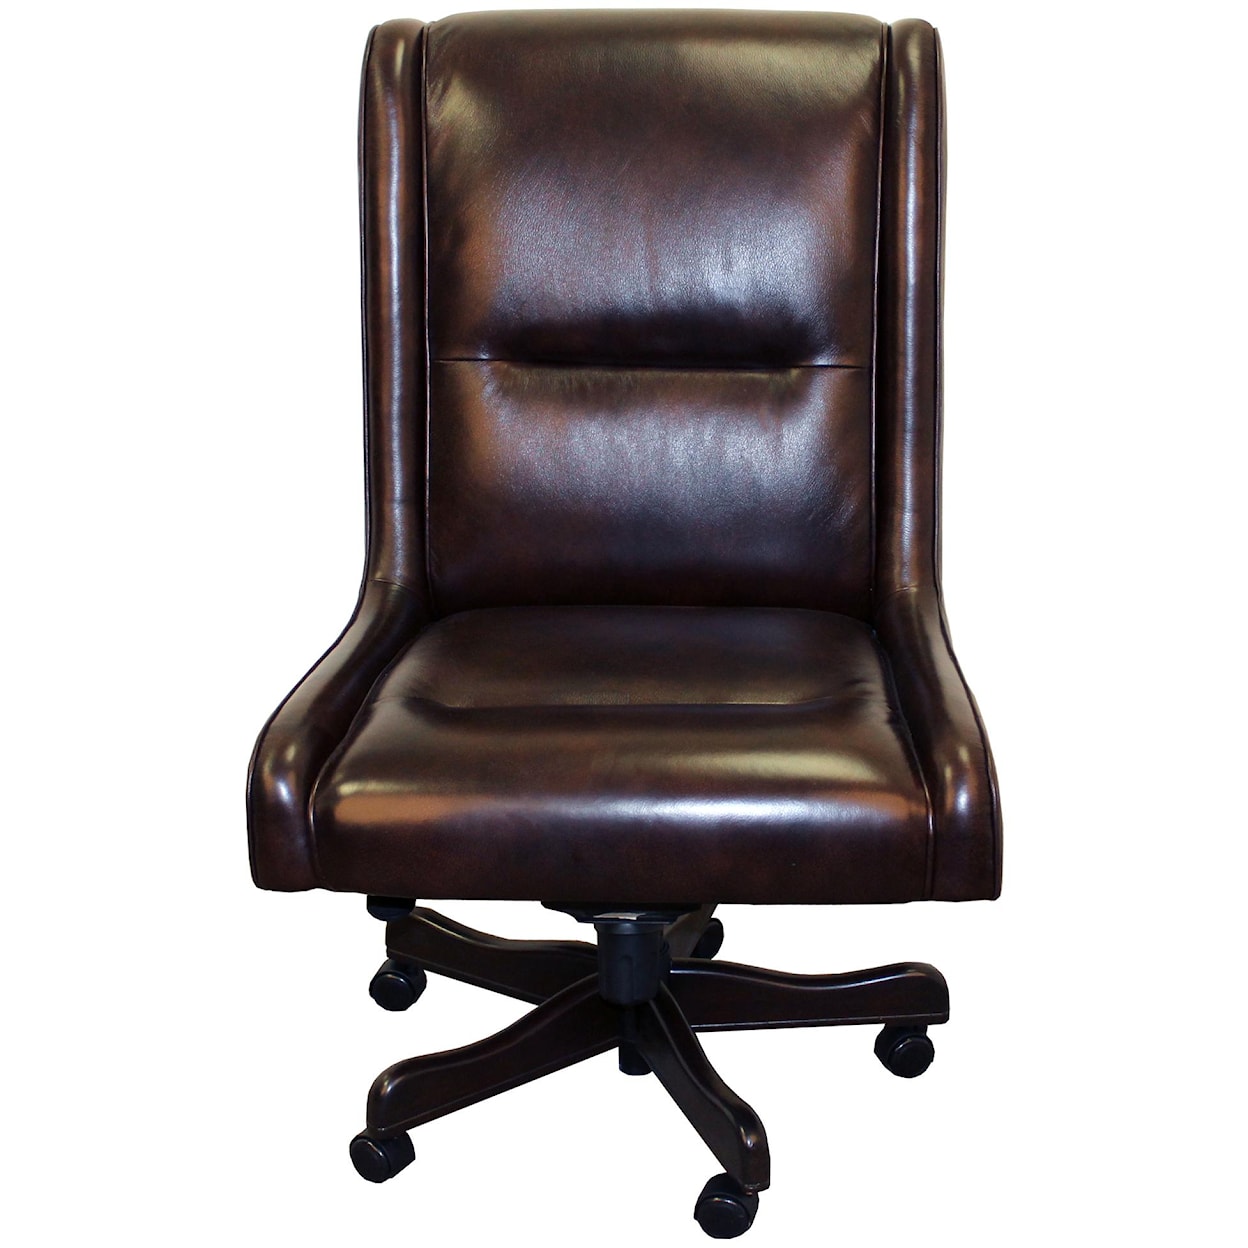 Paramount Living Desk Chairs Executive Chair